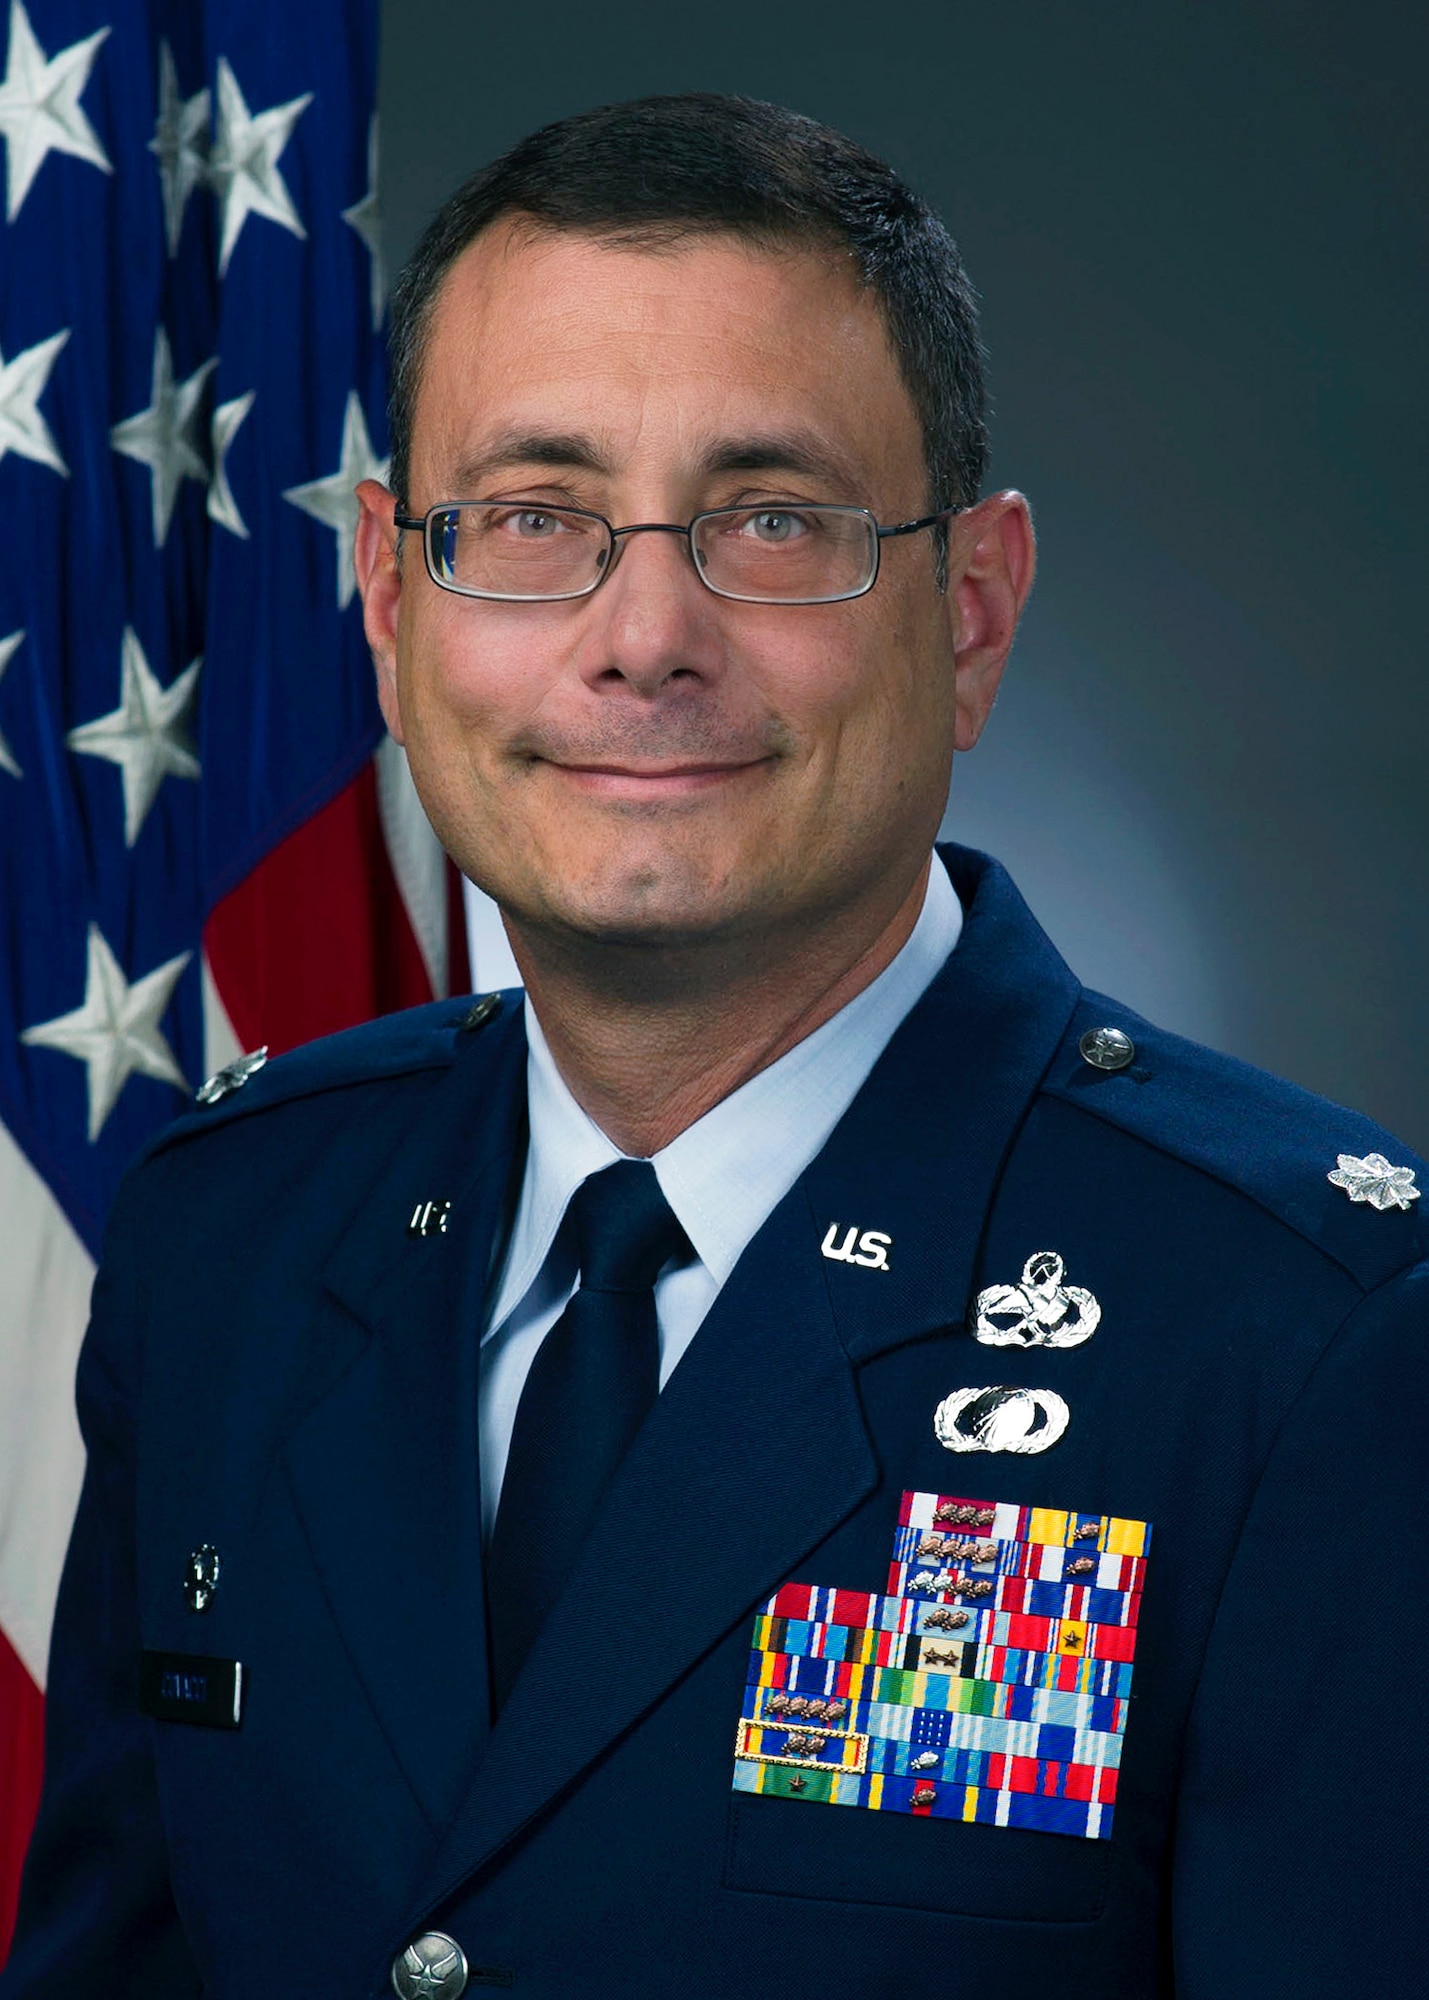 Lt. Col. Claudio Covacci, official photo, U.S. Air Force